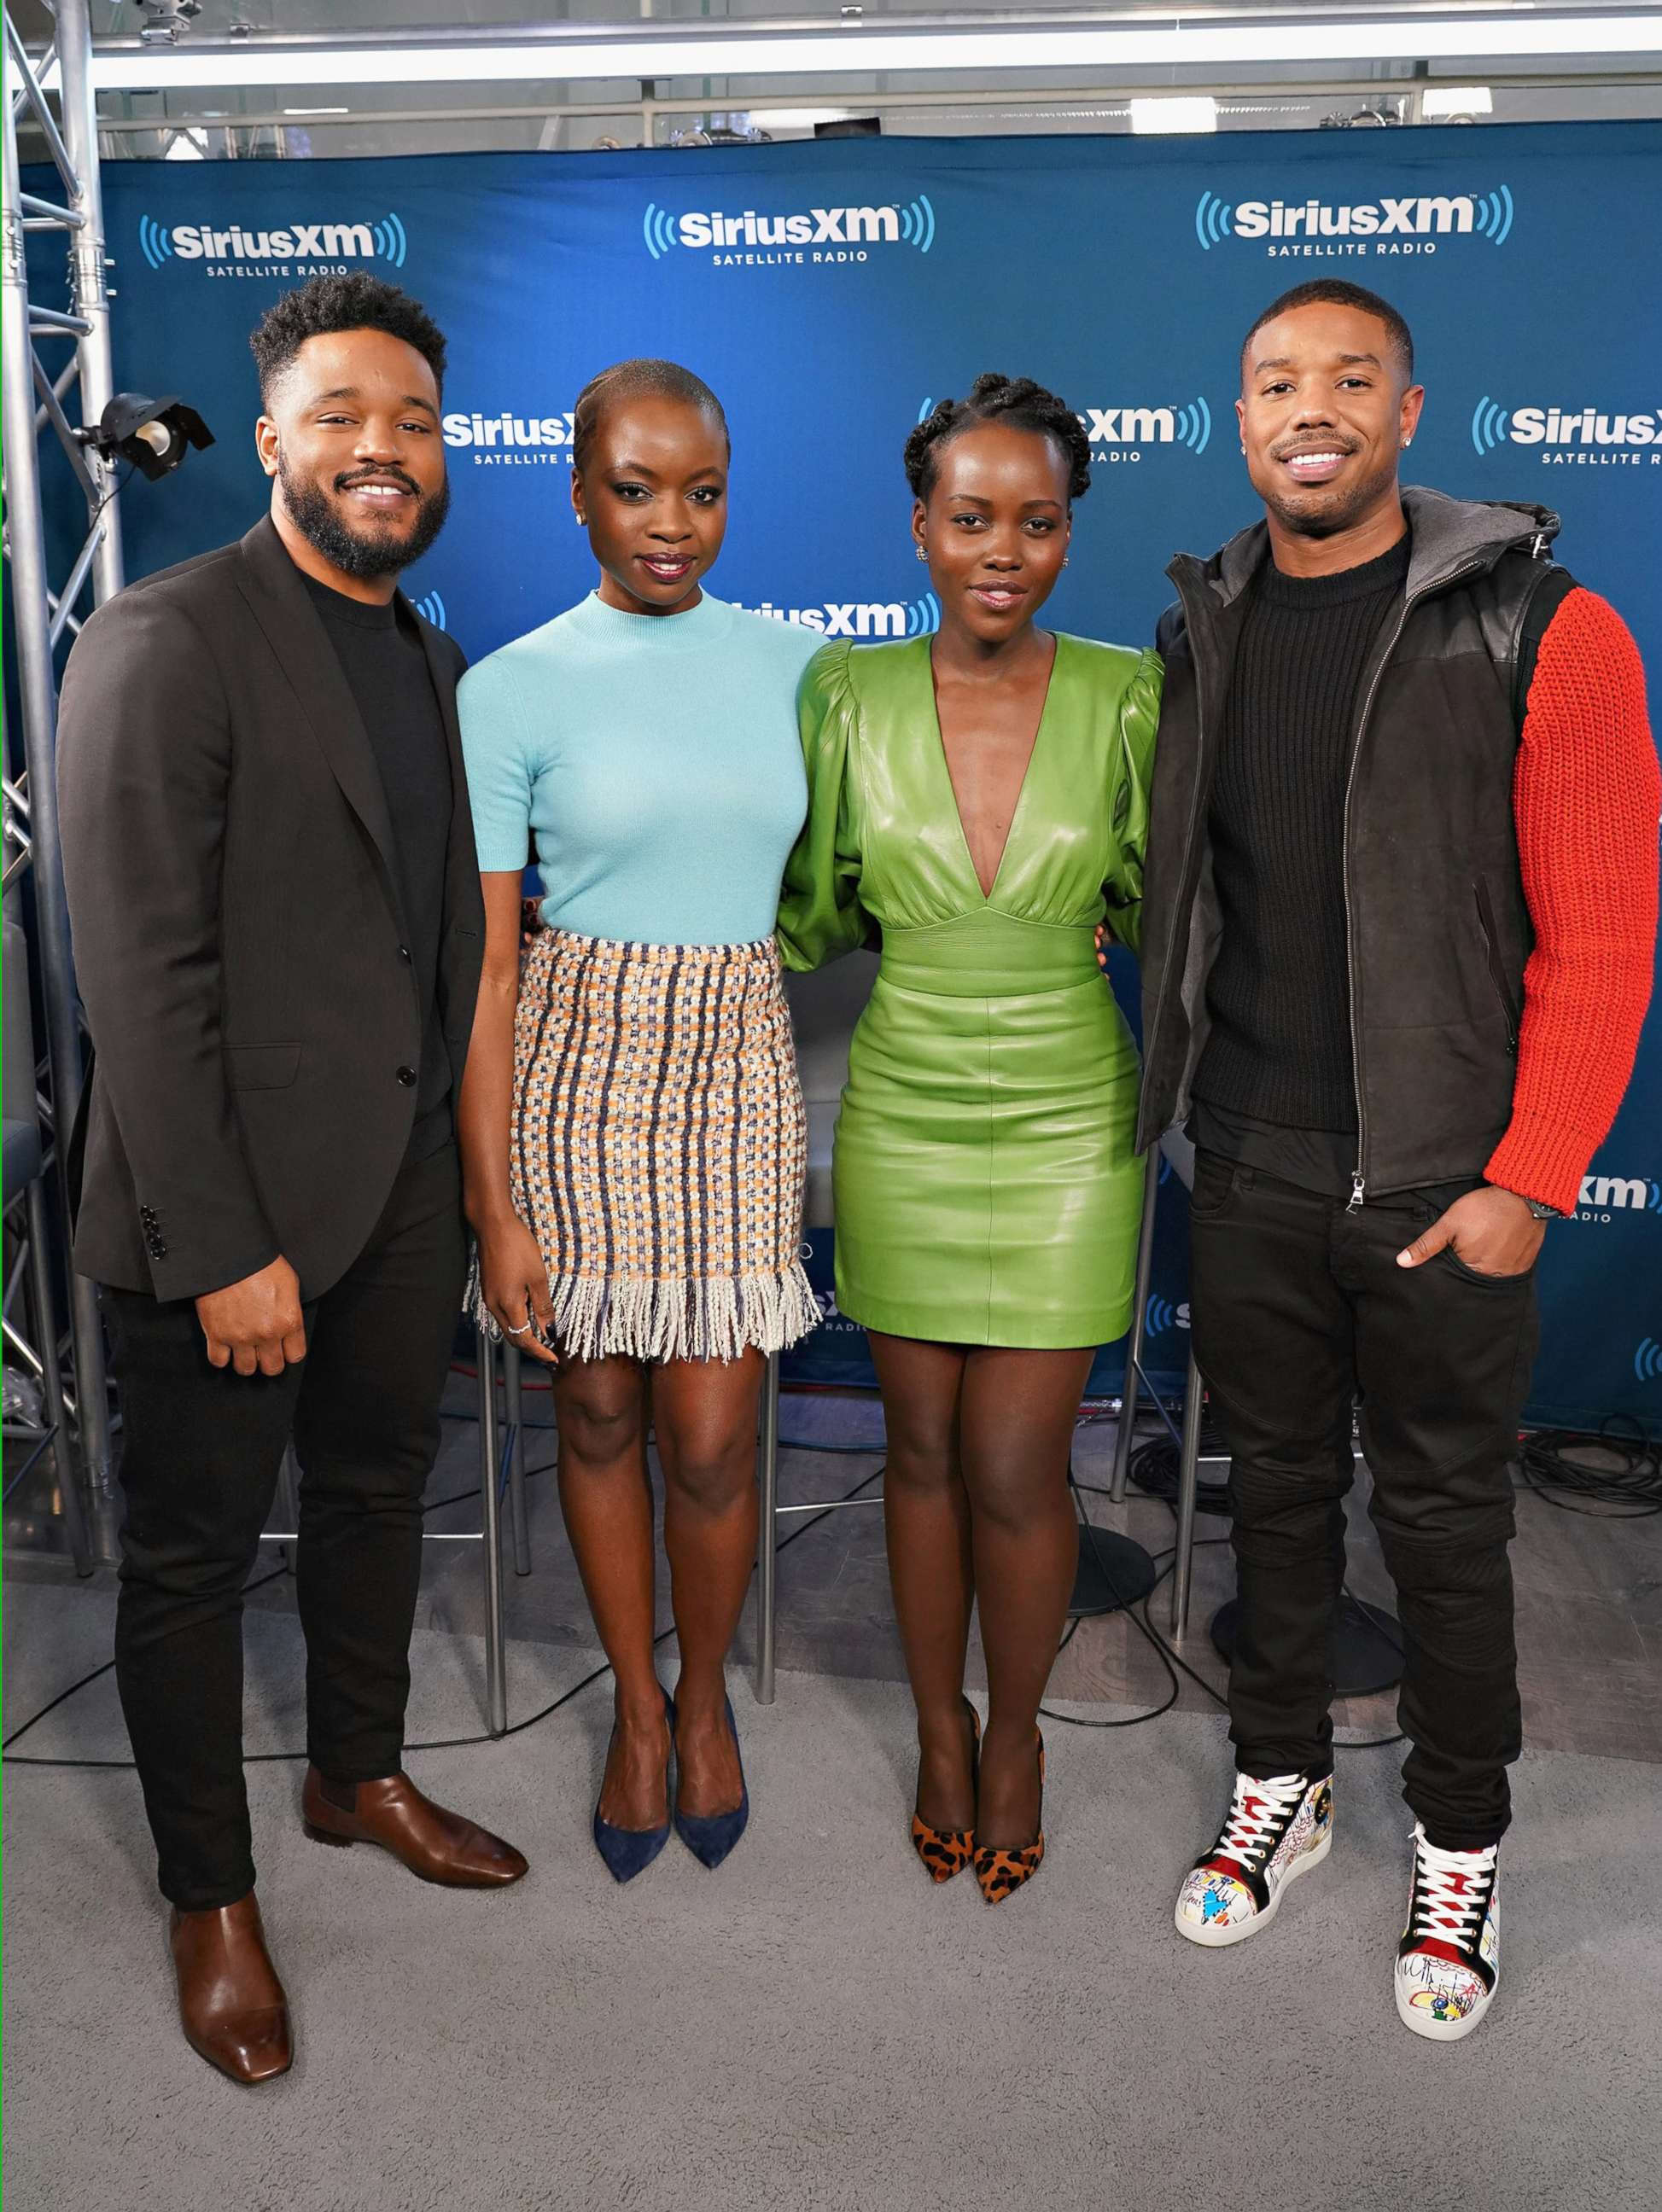 PHOTO: Director Ryan Coogler and actors Danai Gurira, Lupita Nyong'o and Michael B. Jordan take part in SiriusXM's Town Hall with the cast of Black Panther hosted by SiriusXM's Sway Calloway, Feb. 13, 2018 in New York City.